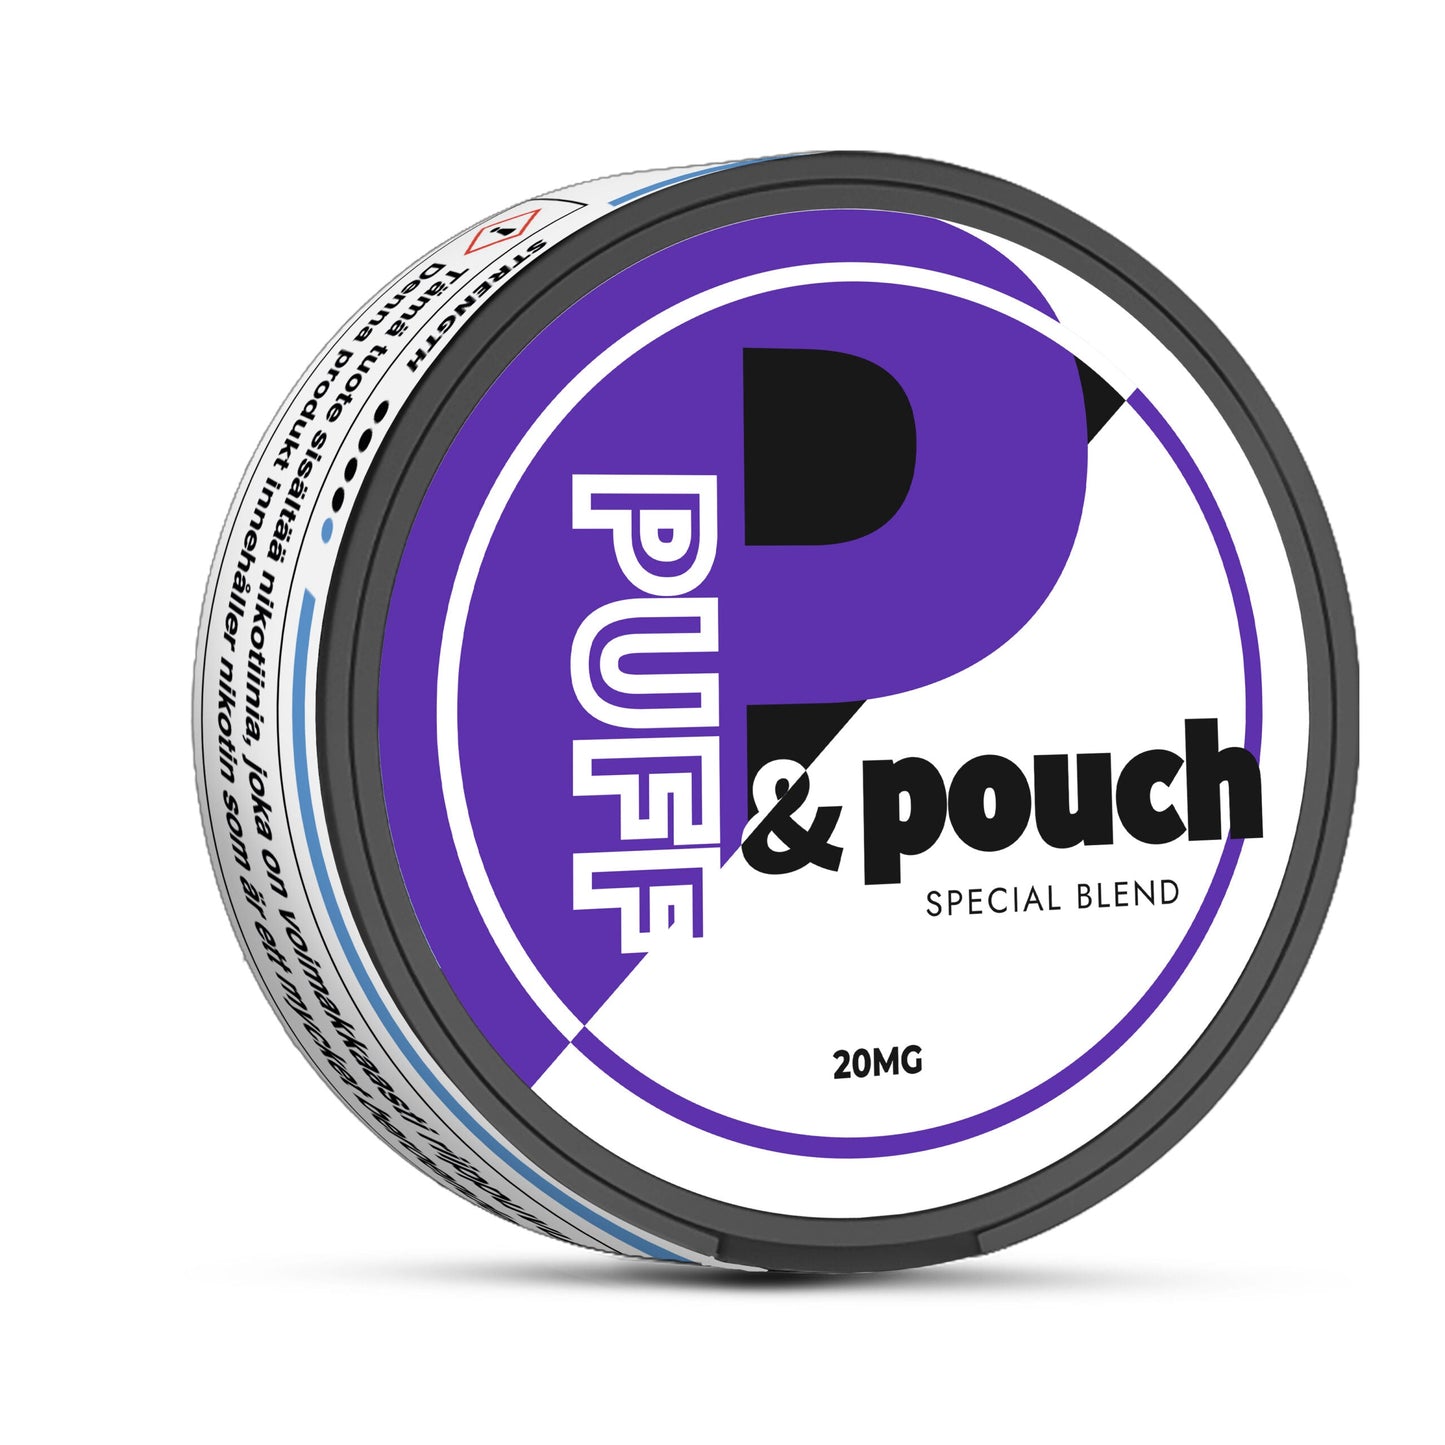 PUFF & POUCH Special Blend Super Berries - 20mg